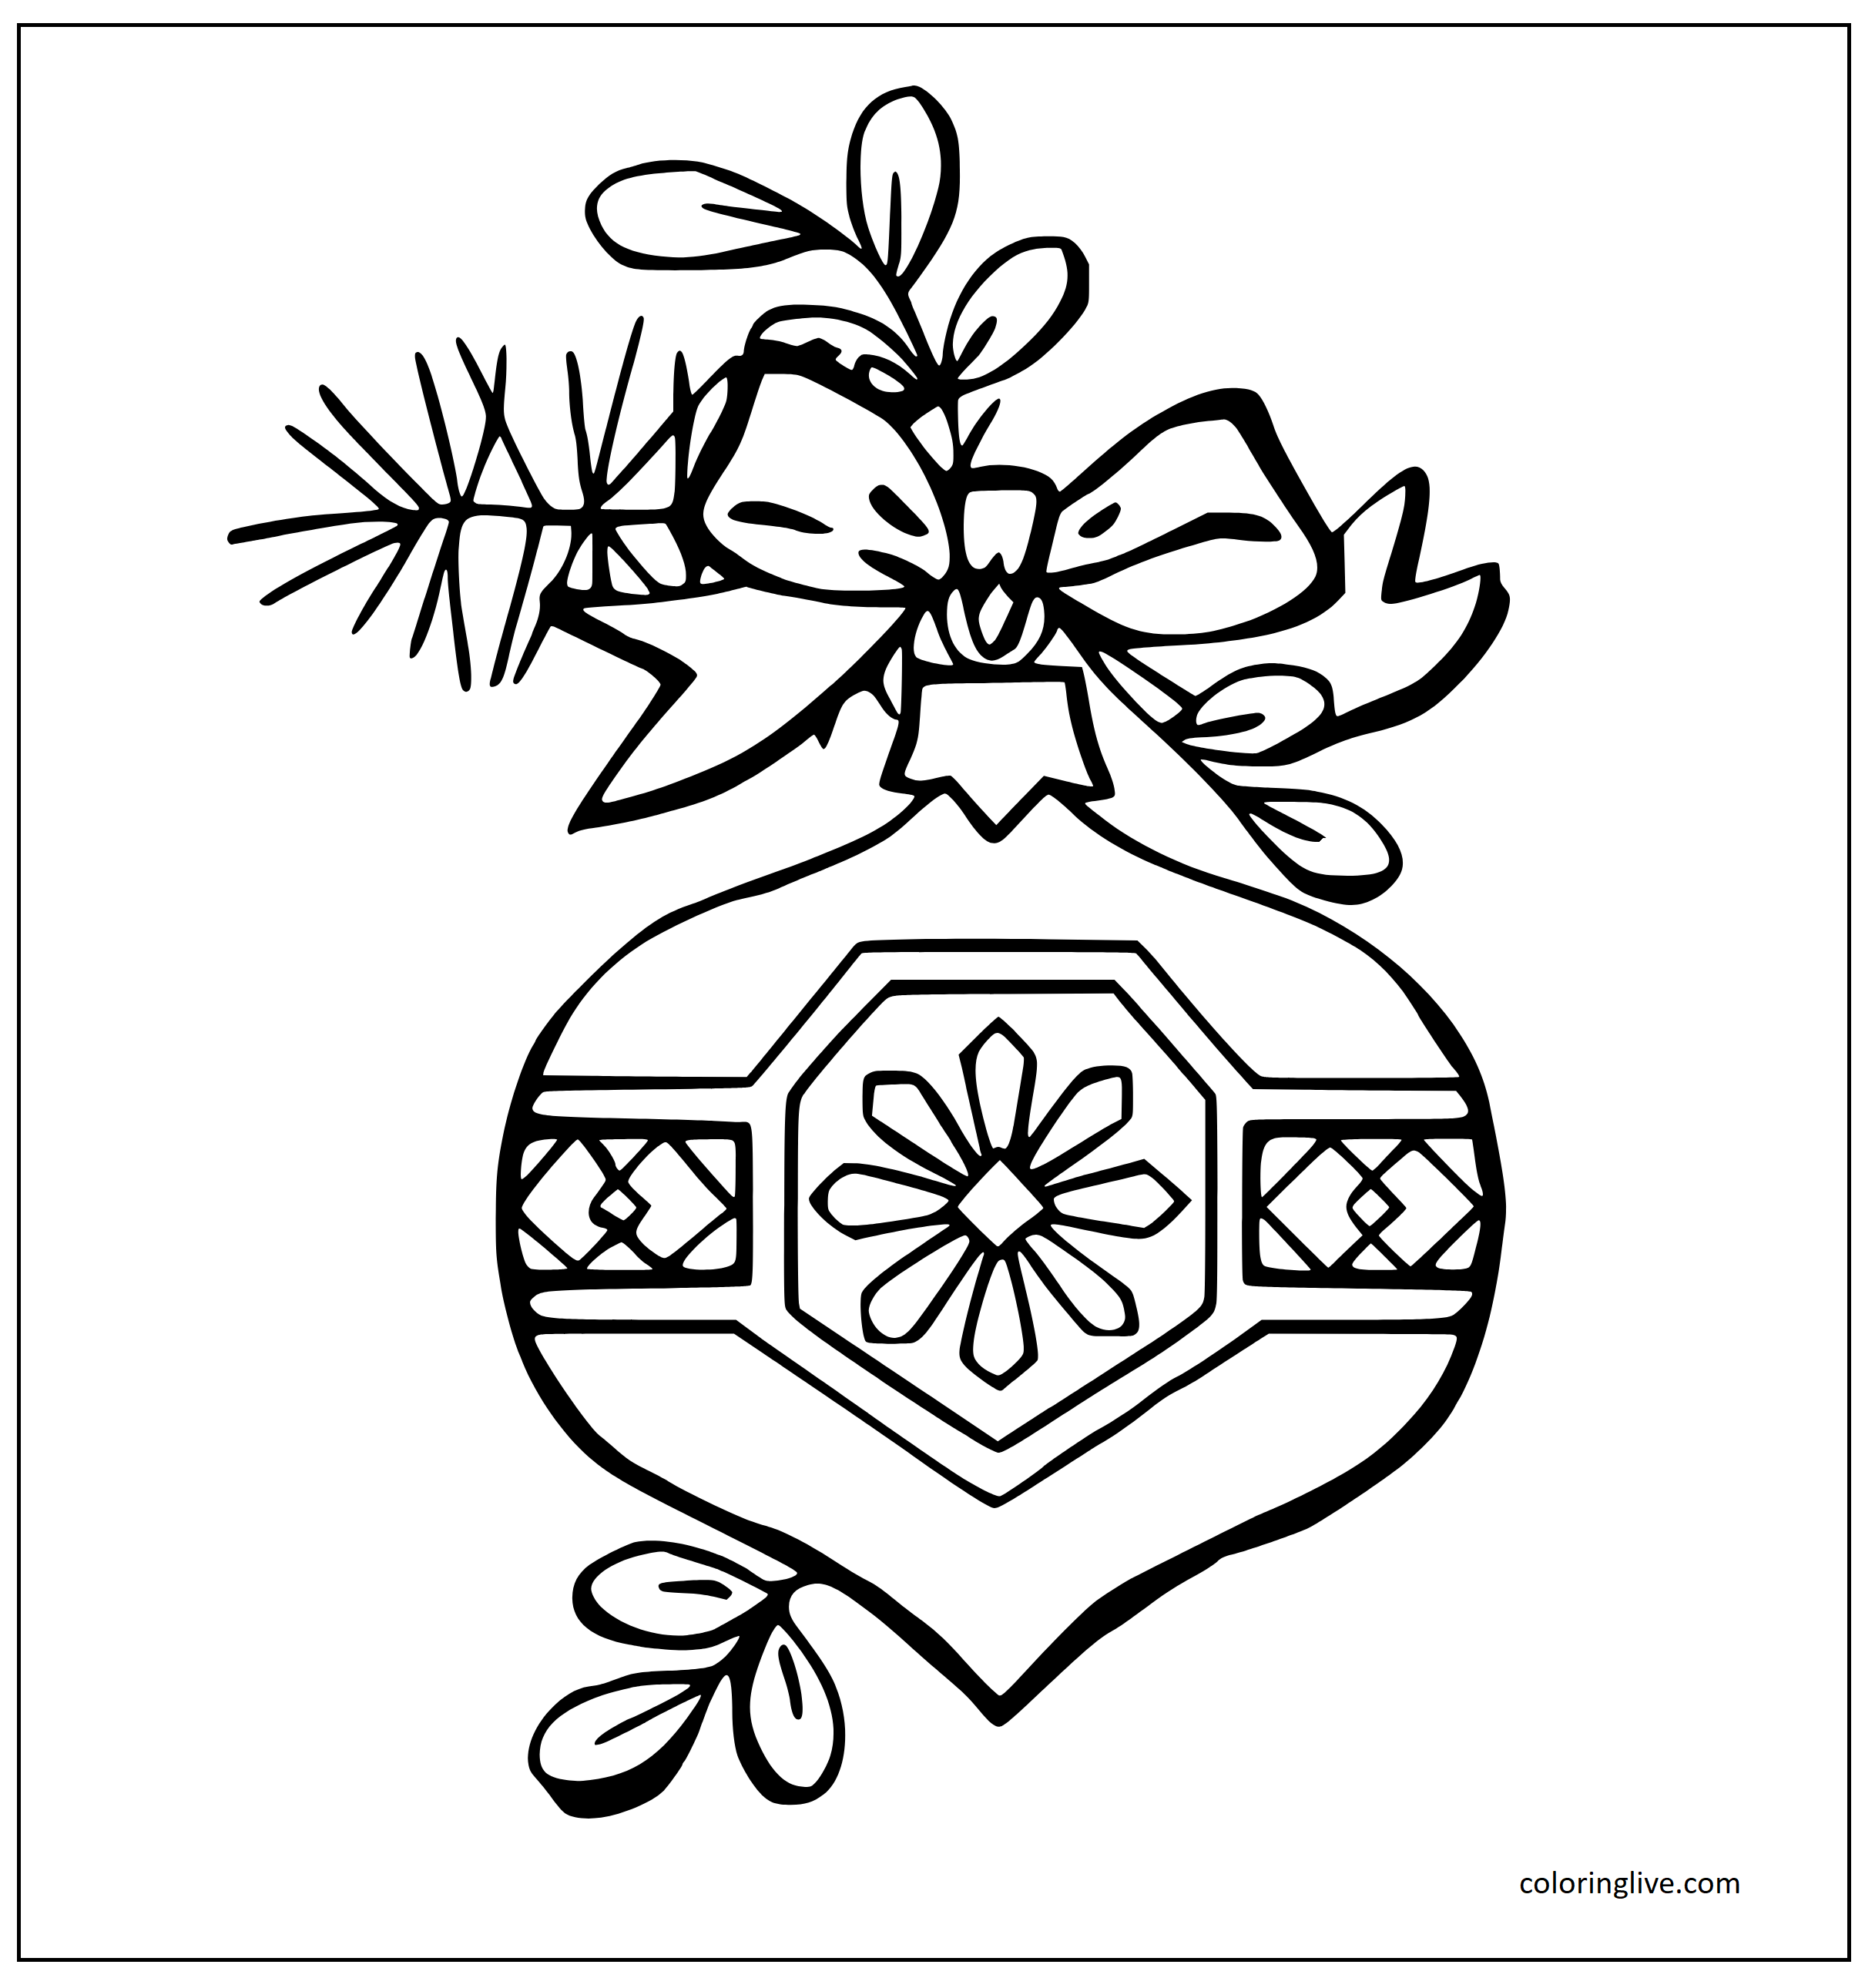 Printable Christmas Ornaments  sheet Coloring Page for kids.